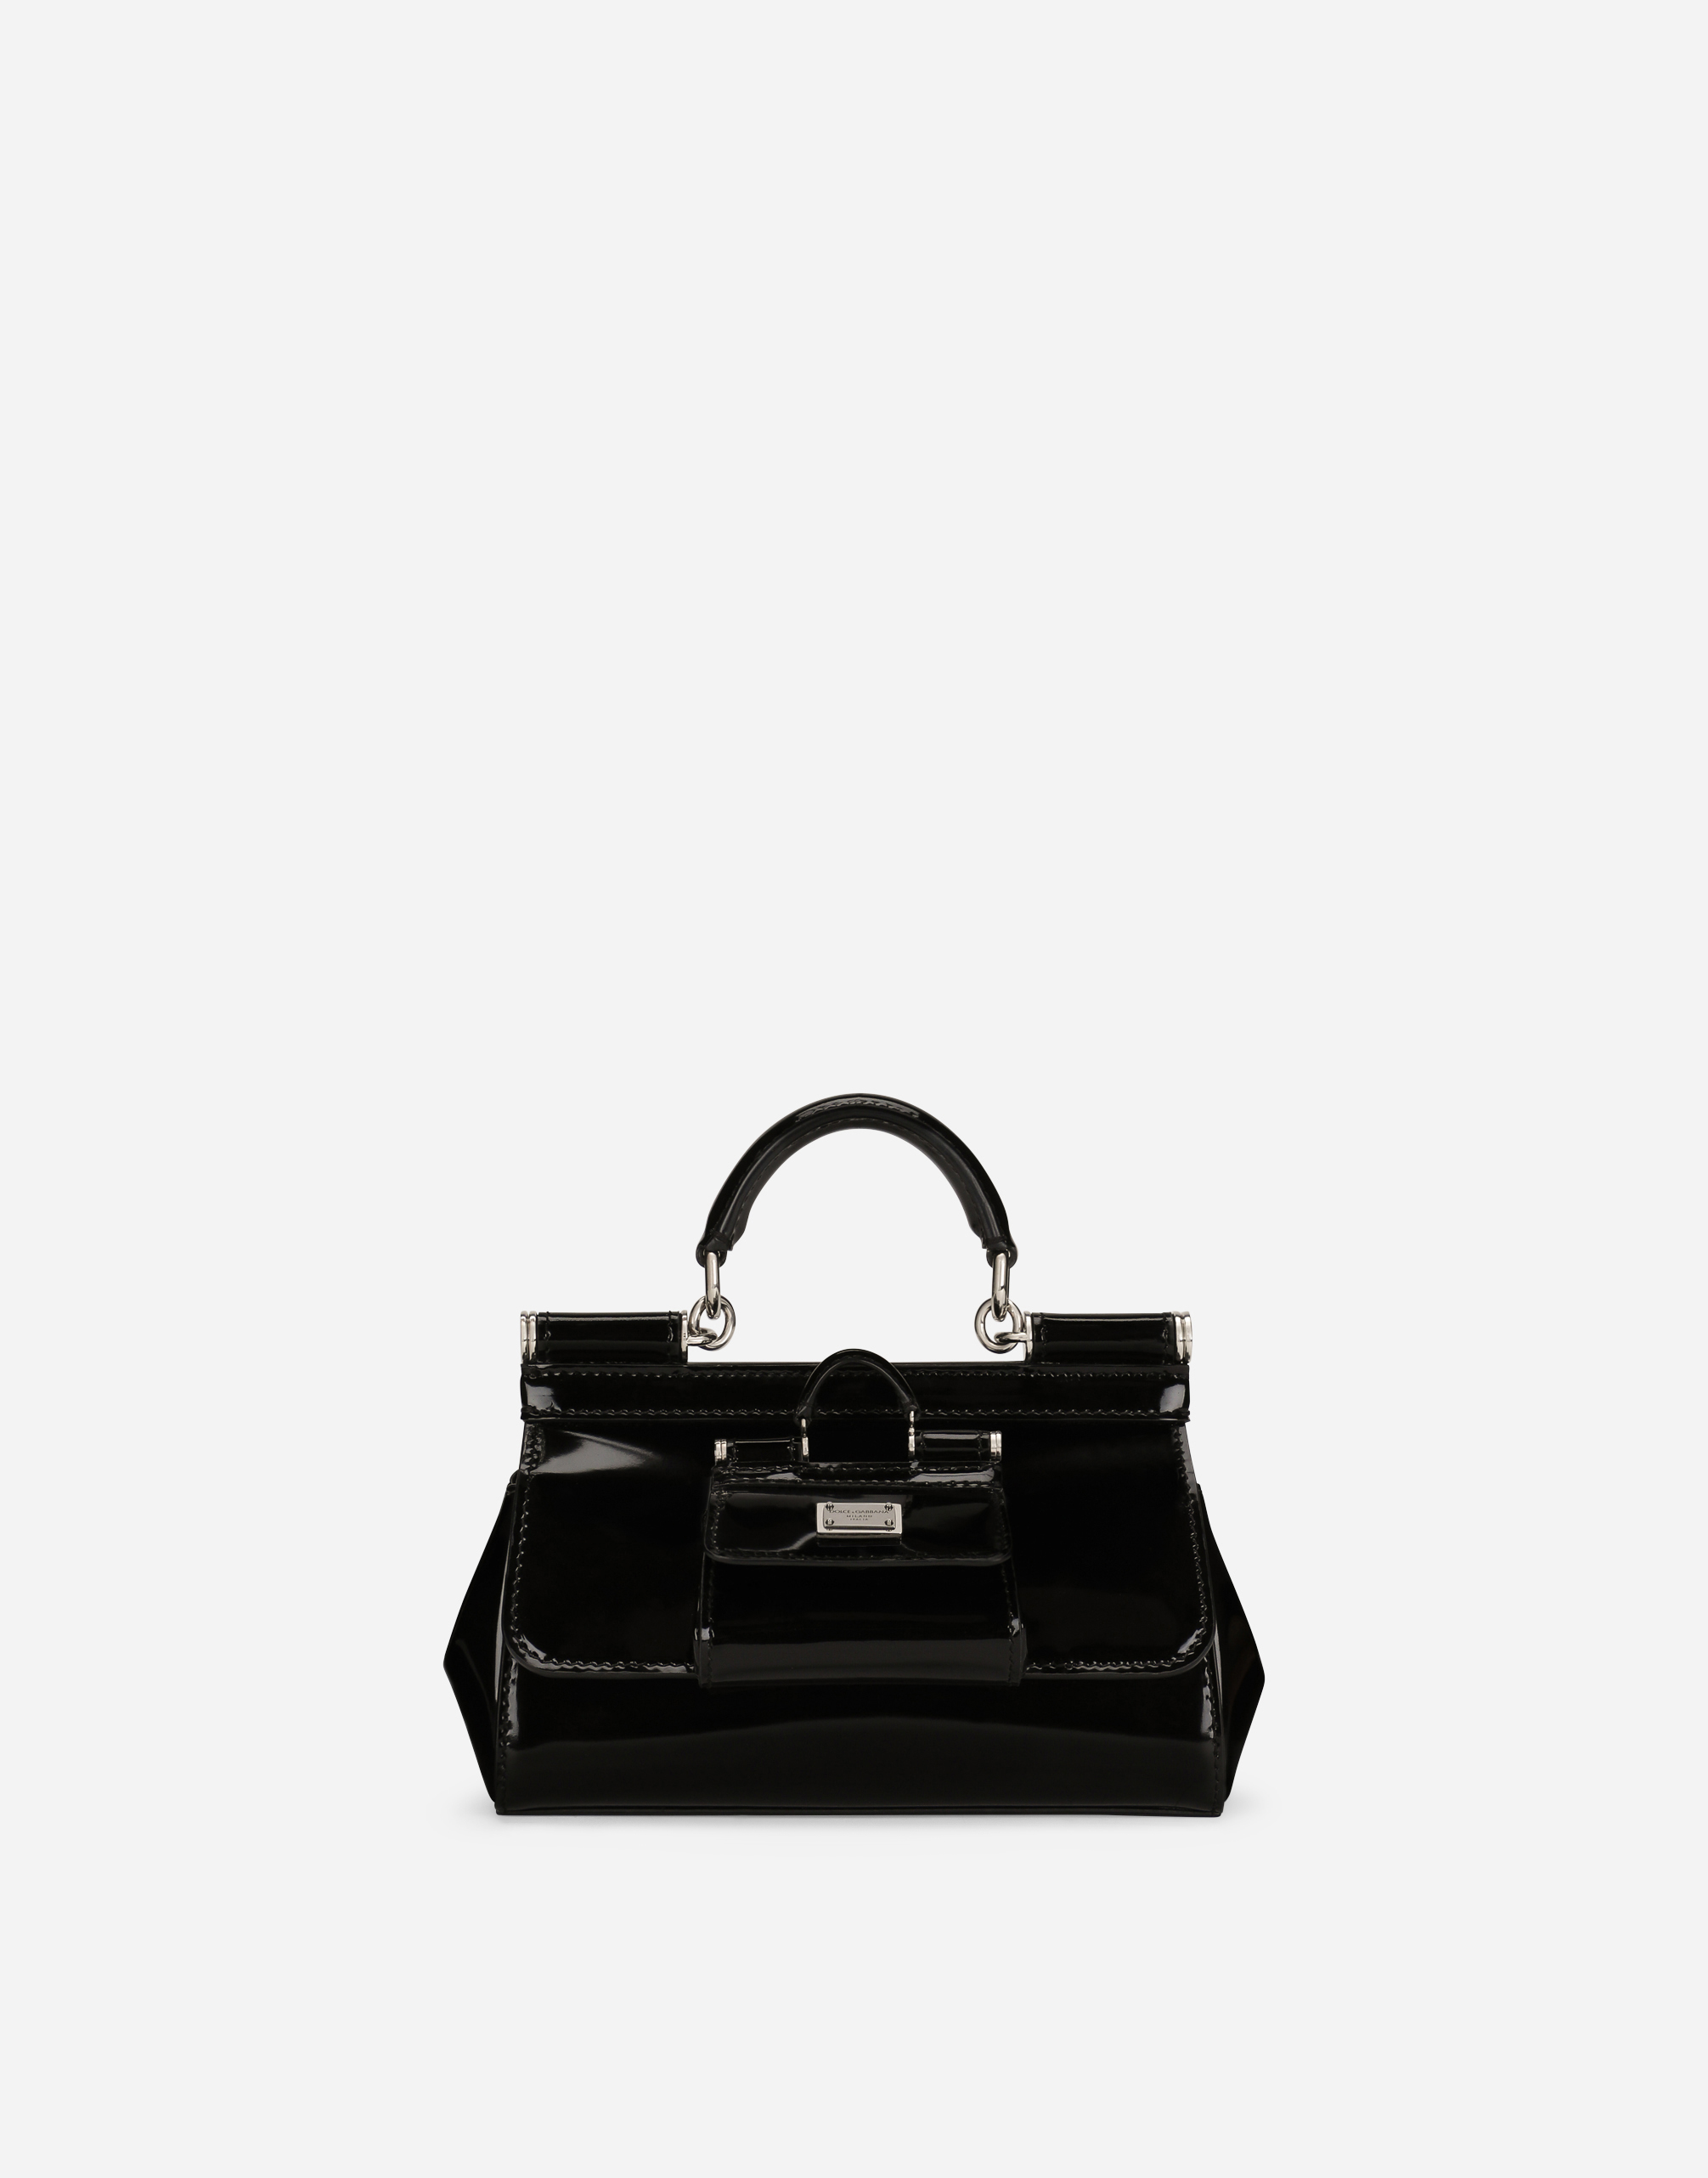 KIM DOLCE&GABBANA Small Sicily bag in polished calfskin with coin pocket in Black